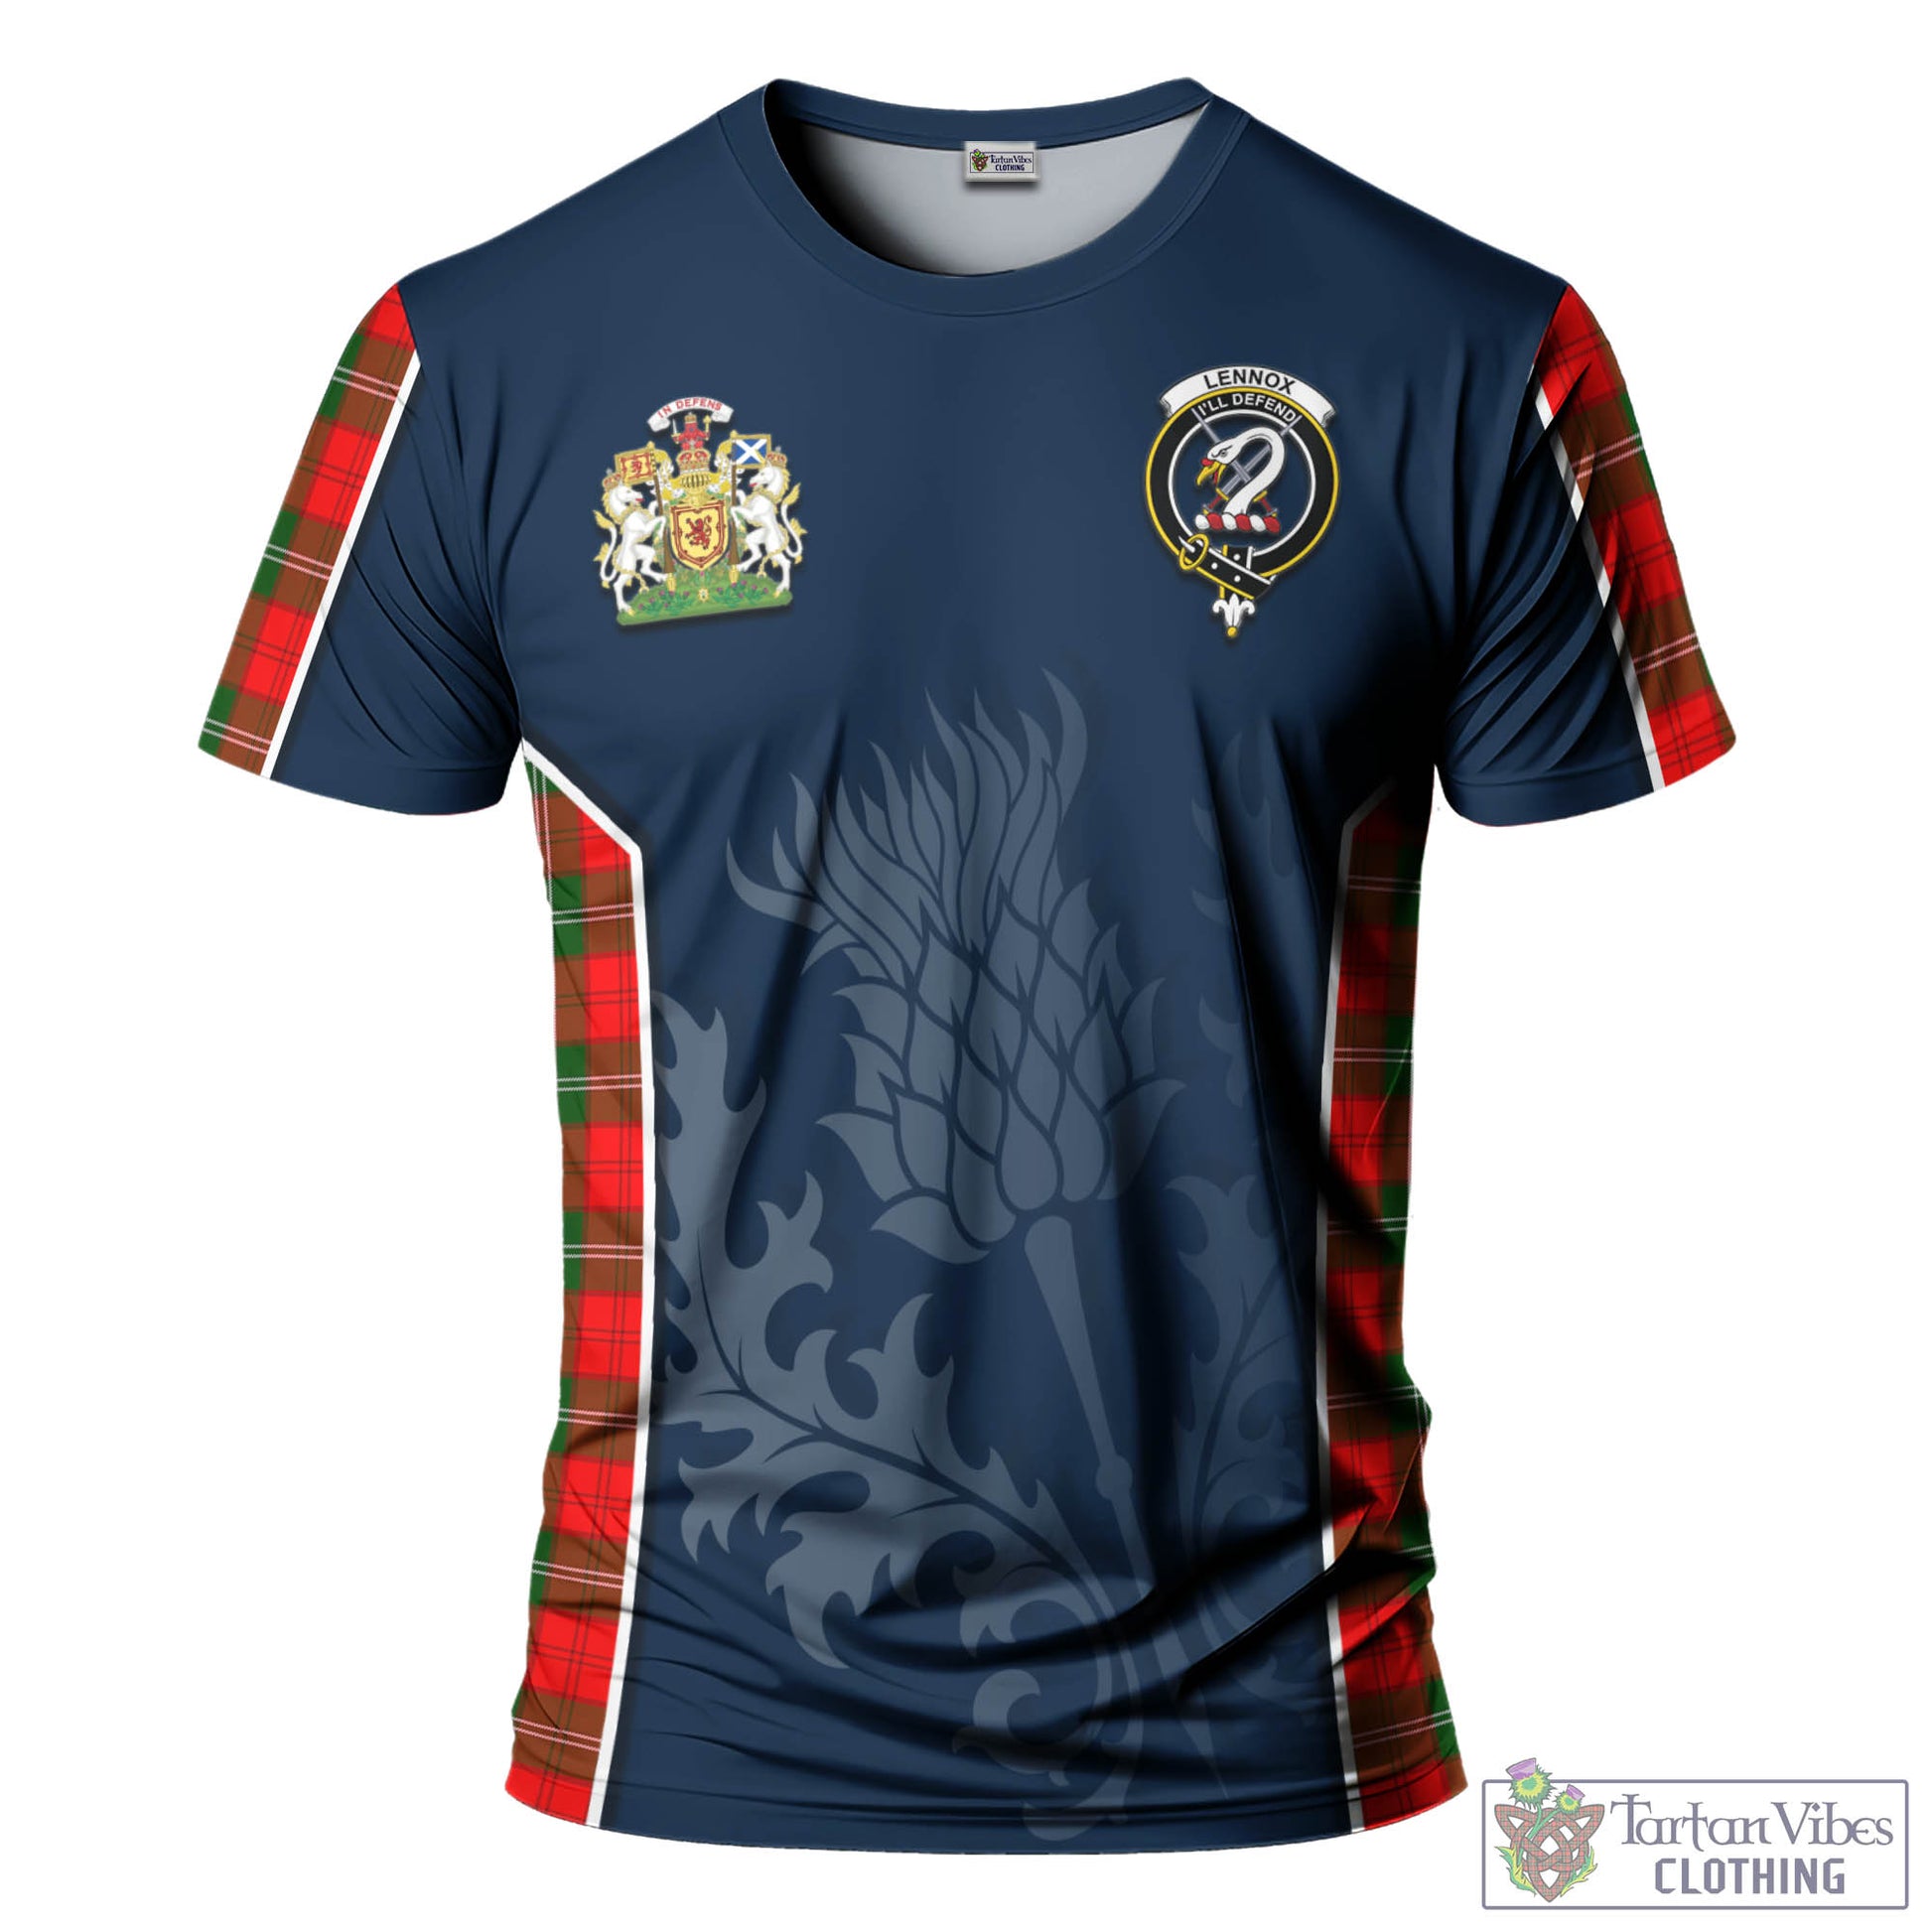 Tartan Vibes Clothing Lennox Modern Tartan T-Shirt with Family Crest and Scottish Thistle Vibes Sport Style